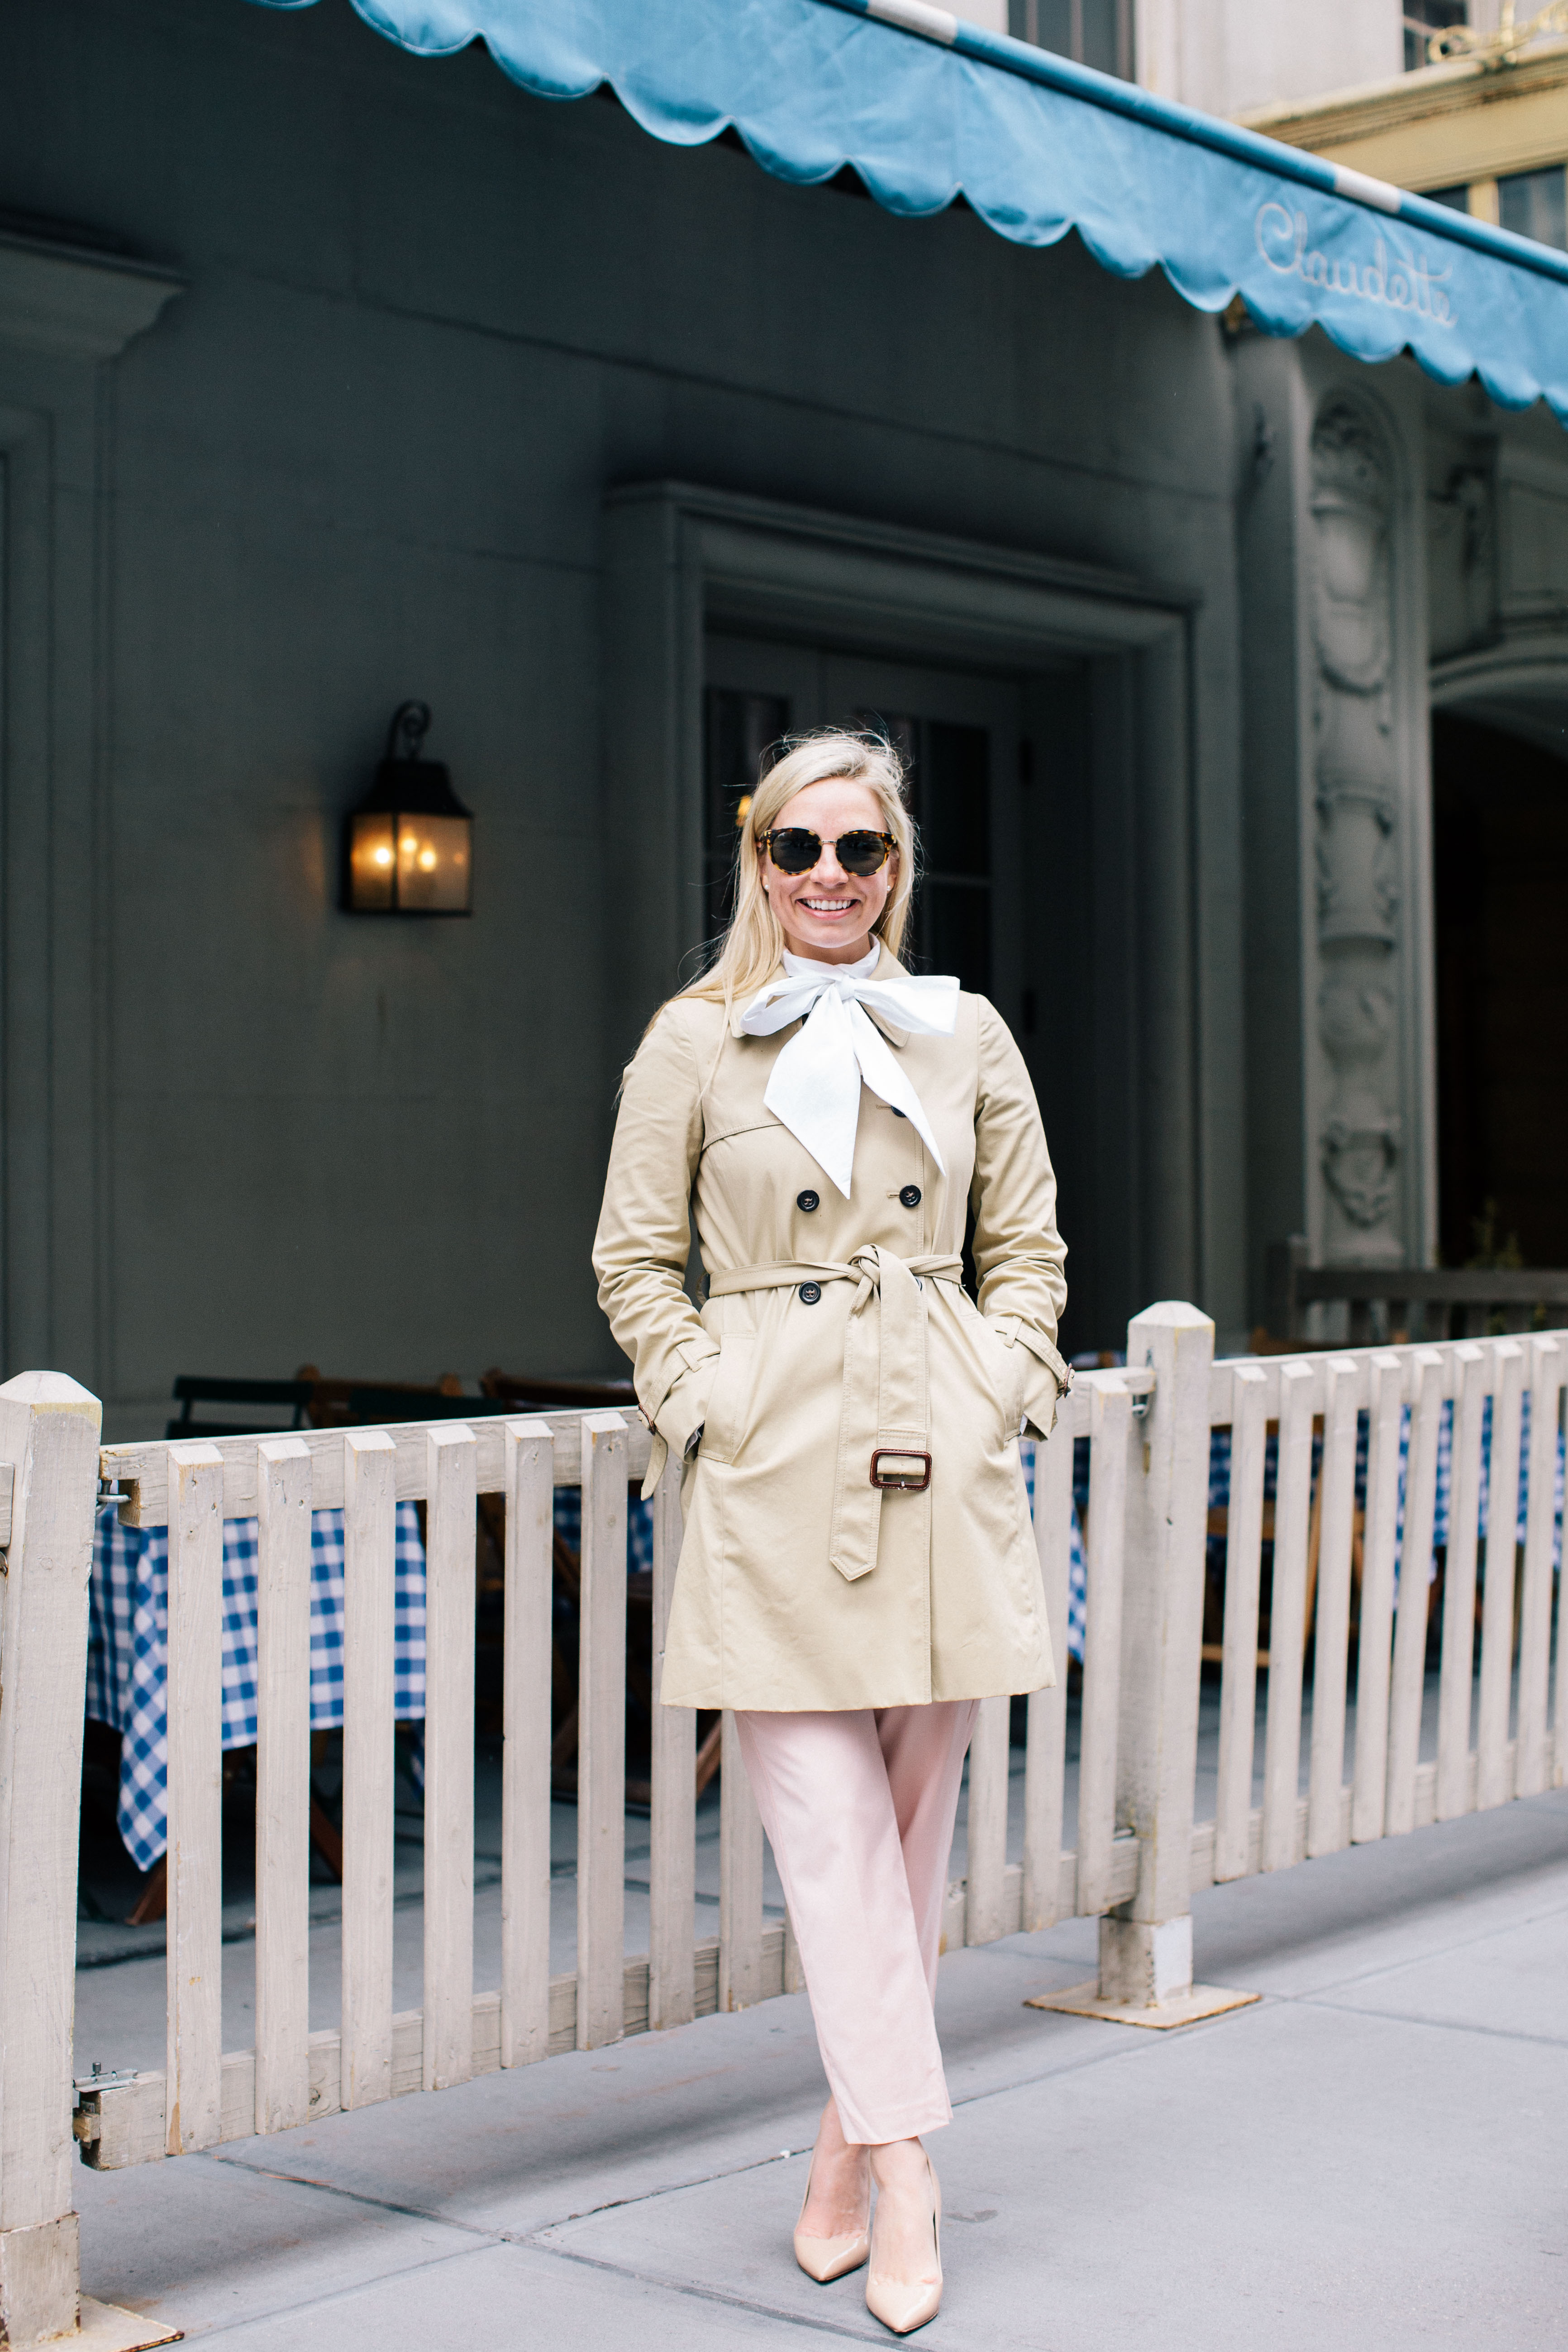 classic trench coat for april showers and for women of style